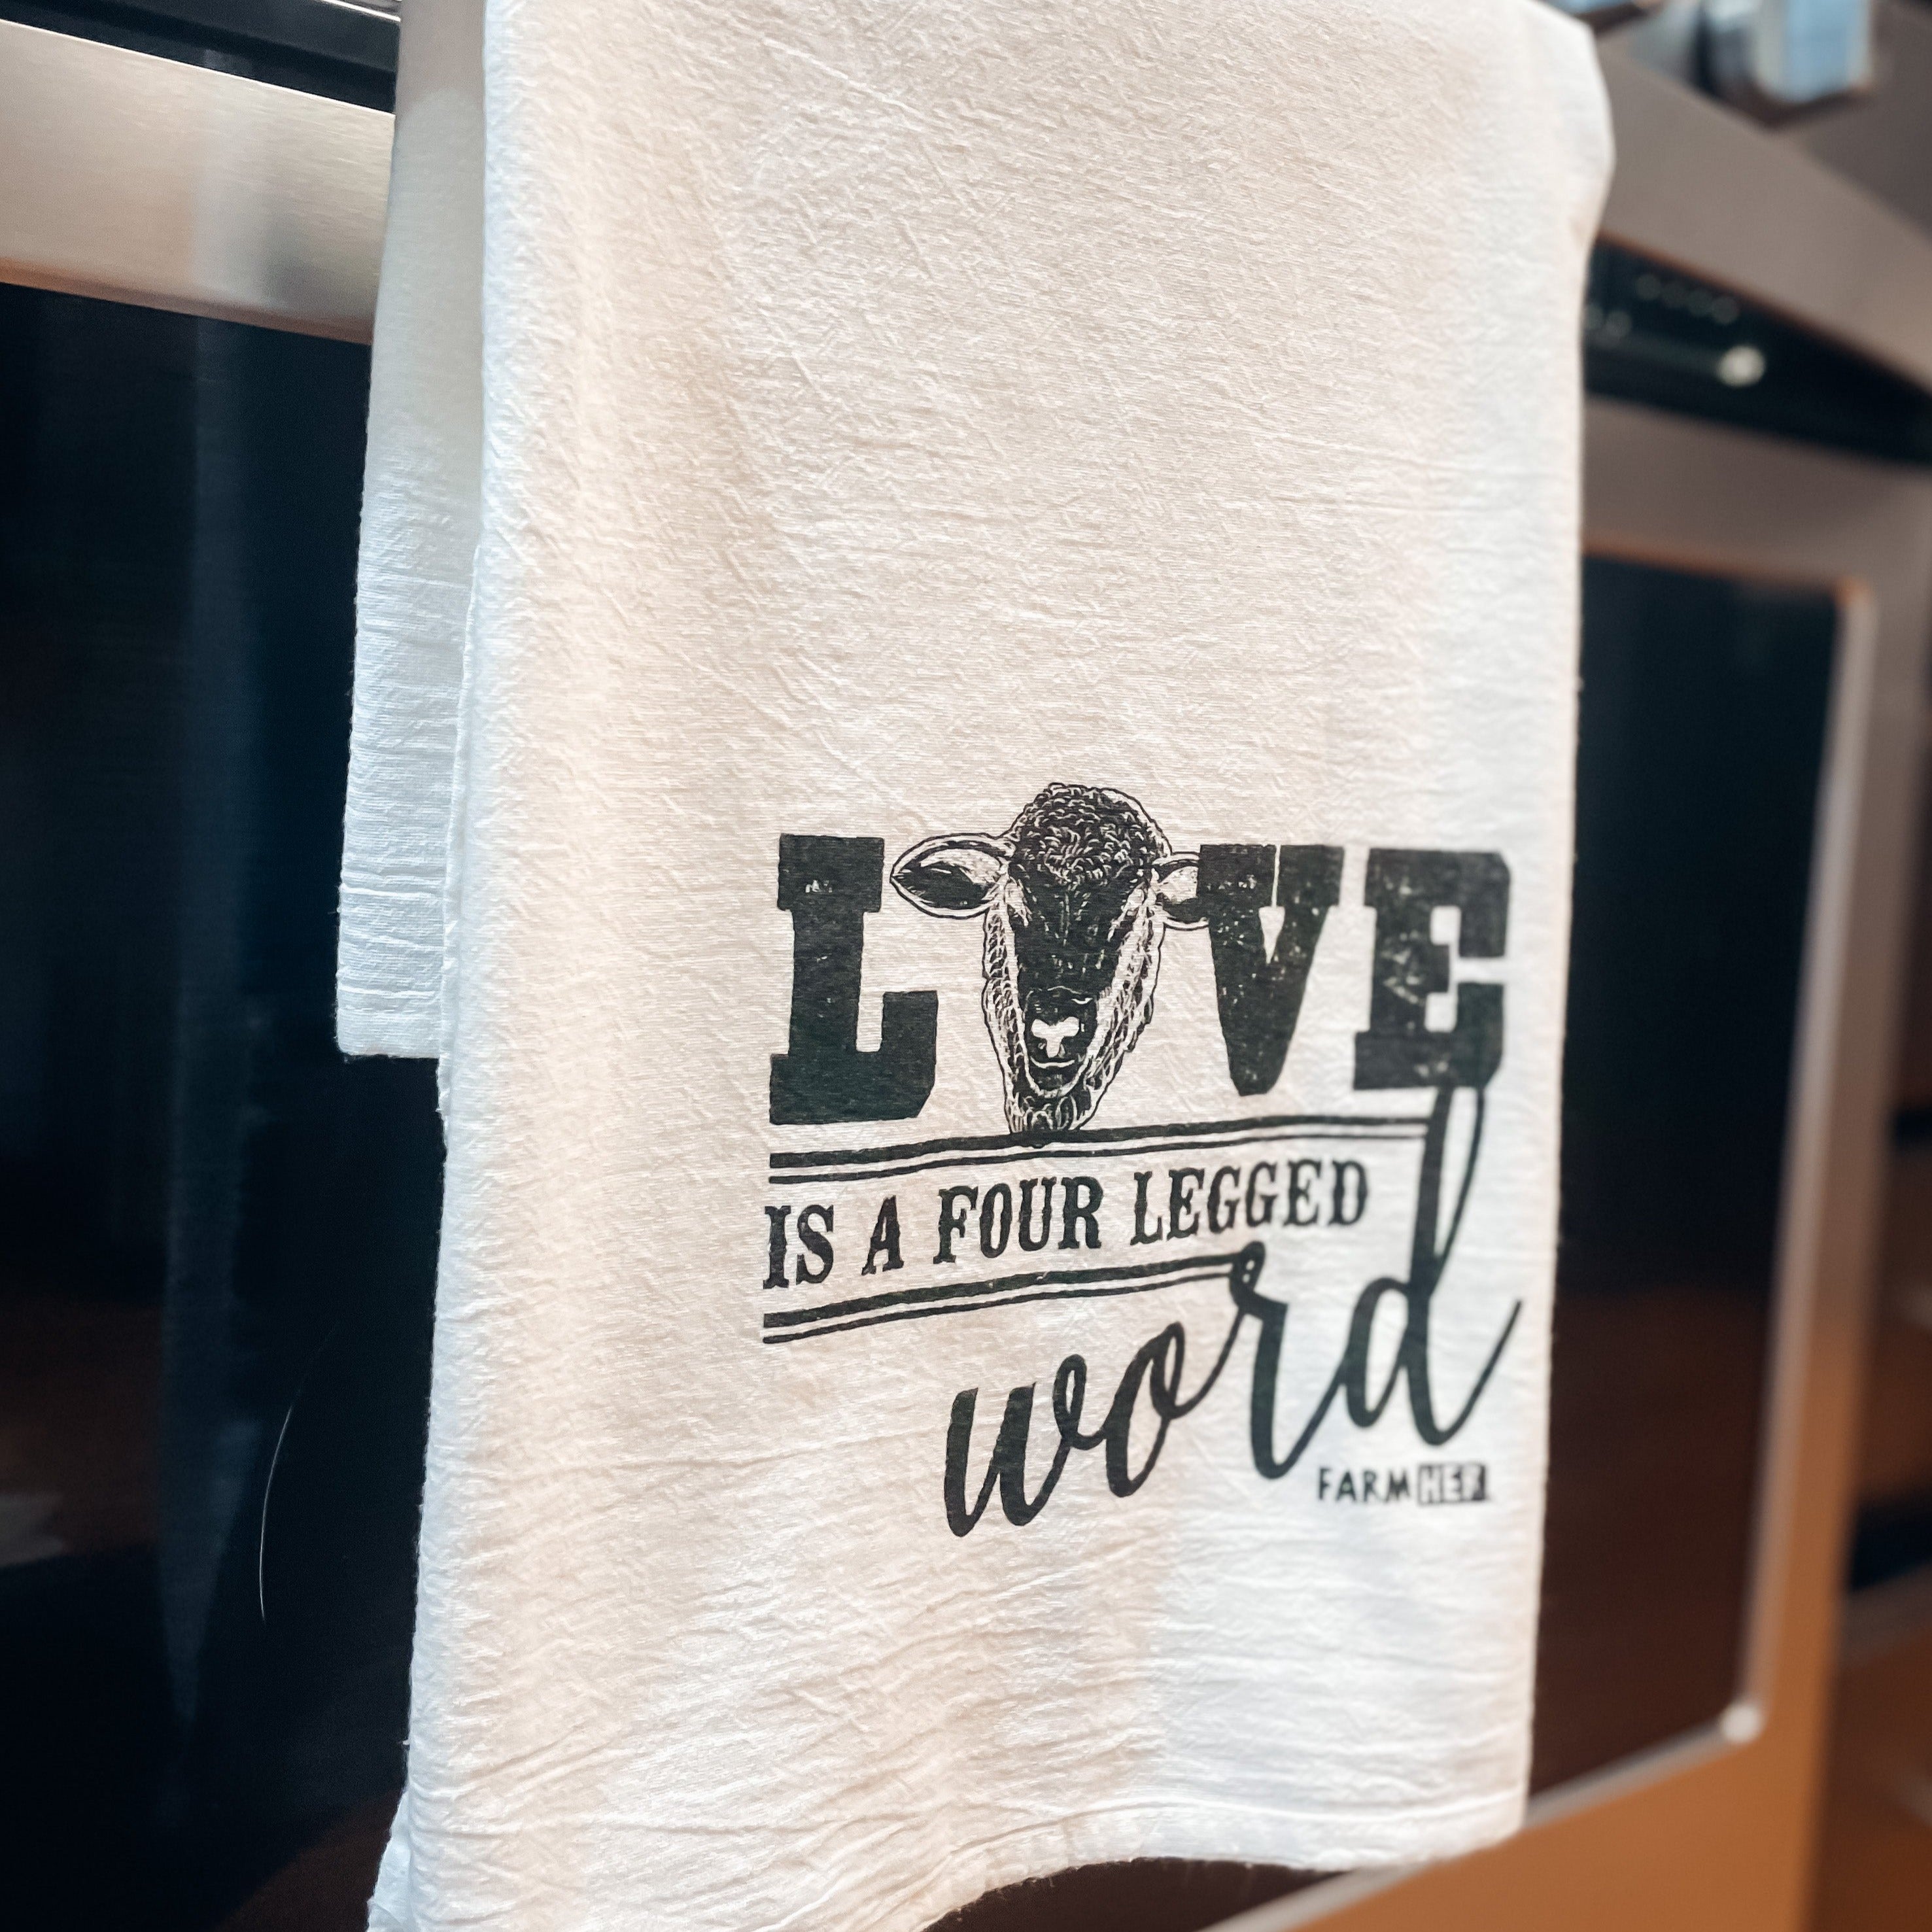 Dish Towel "Sheep Love is a Four Letter Word" FarmHer